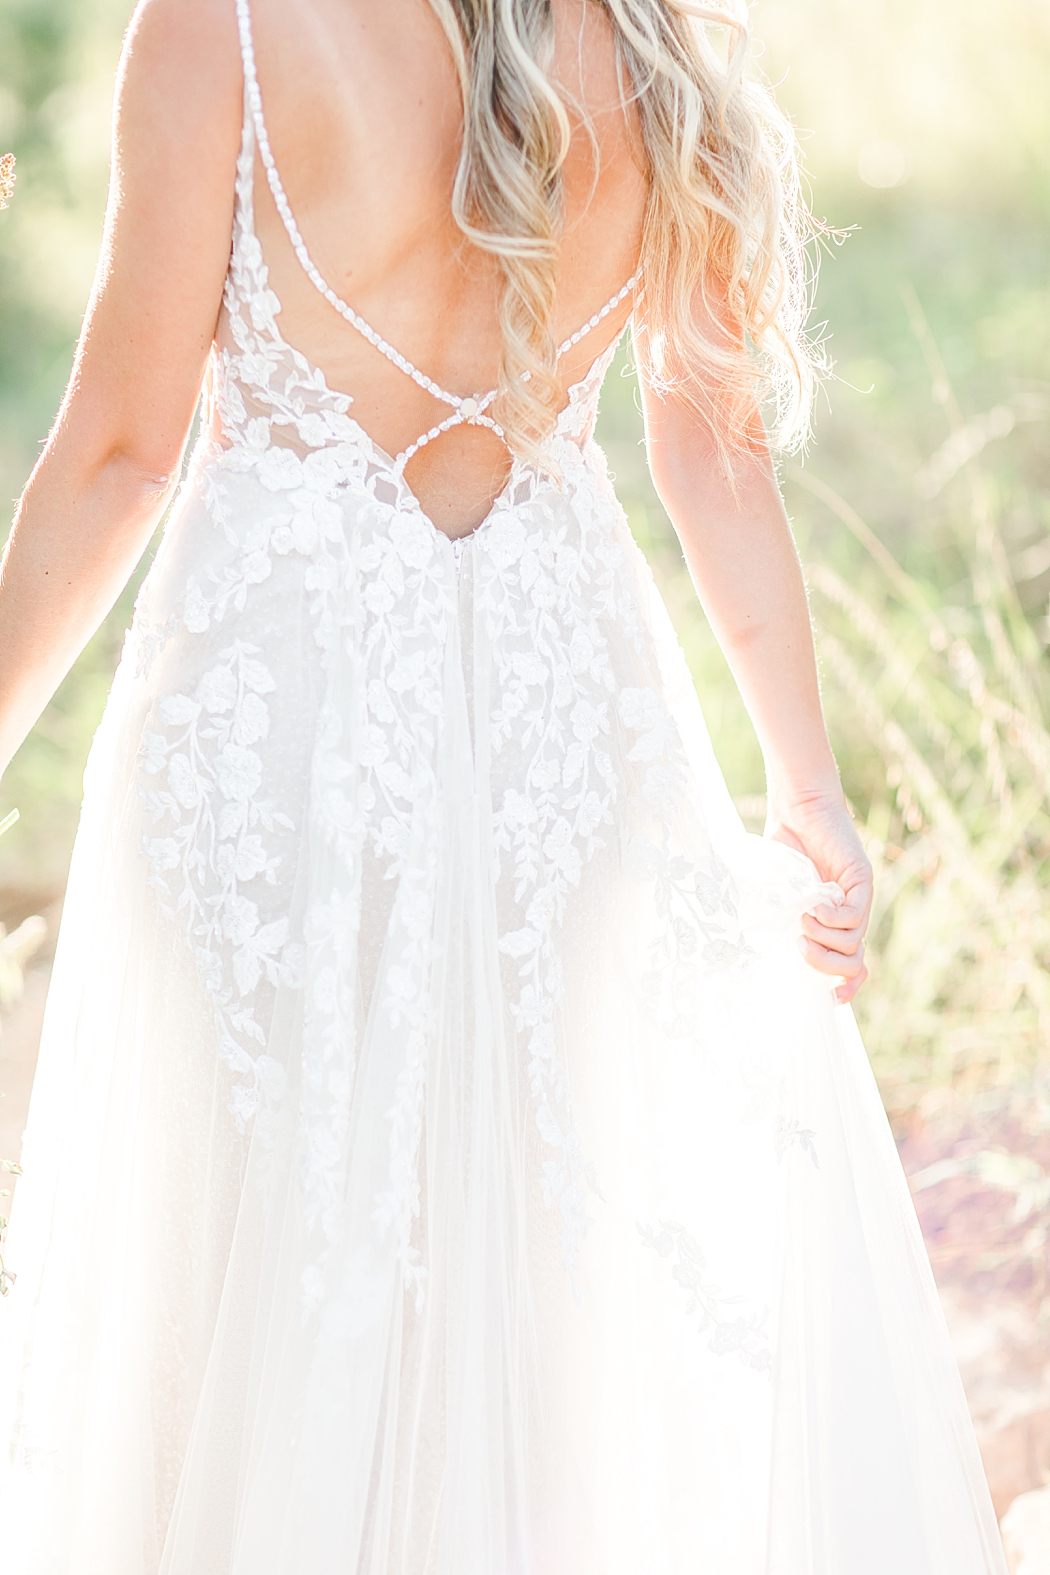 Summer Bridal Session at Contigo Ranch in Frederickburg Texas by Allison Jeffers Photography 0014